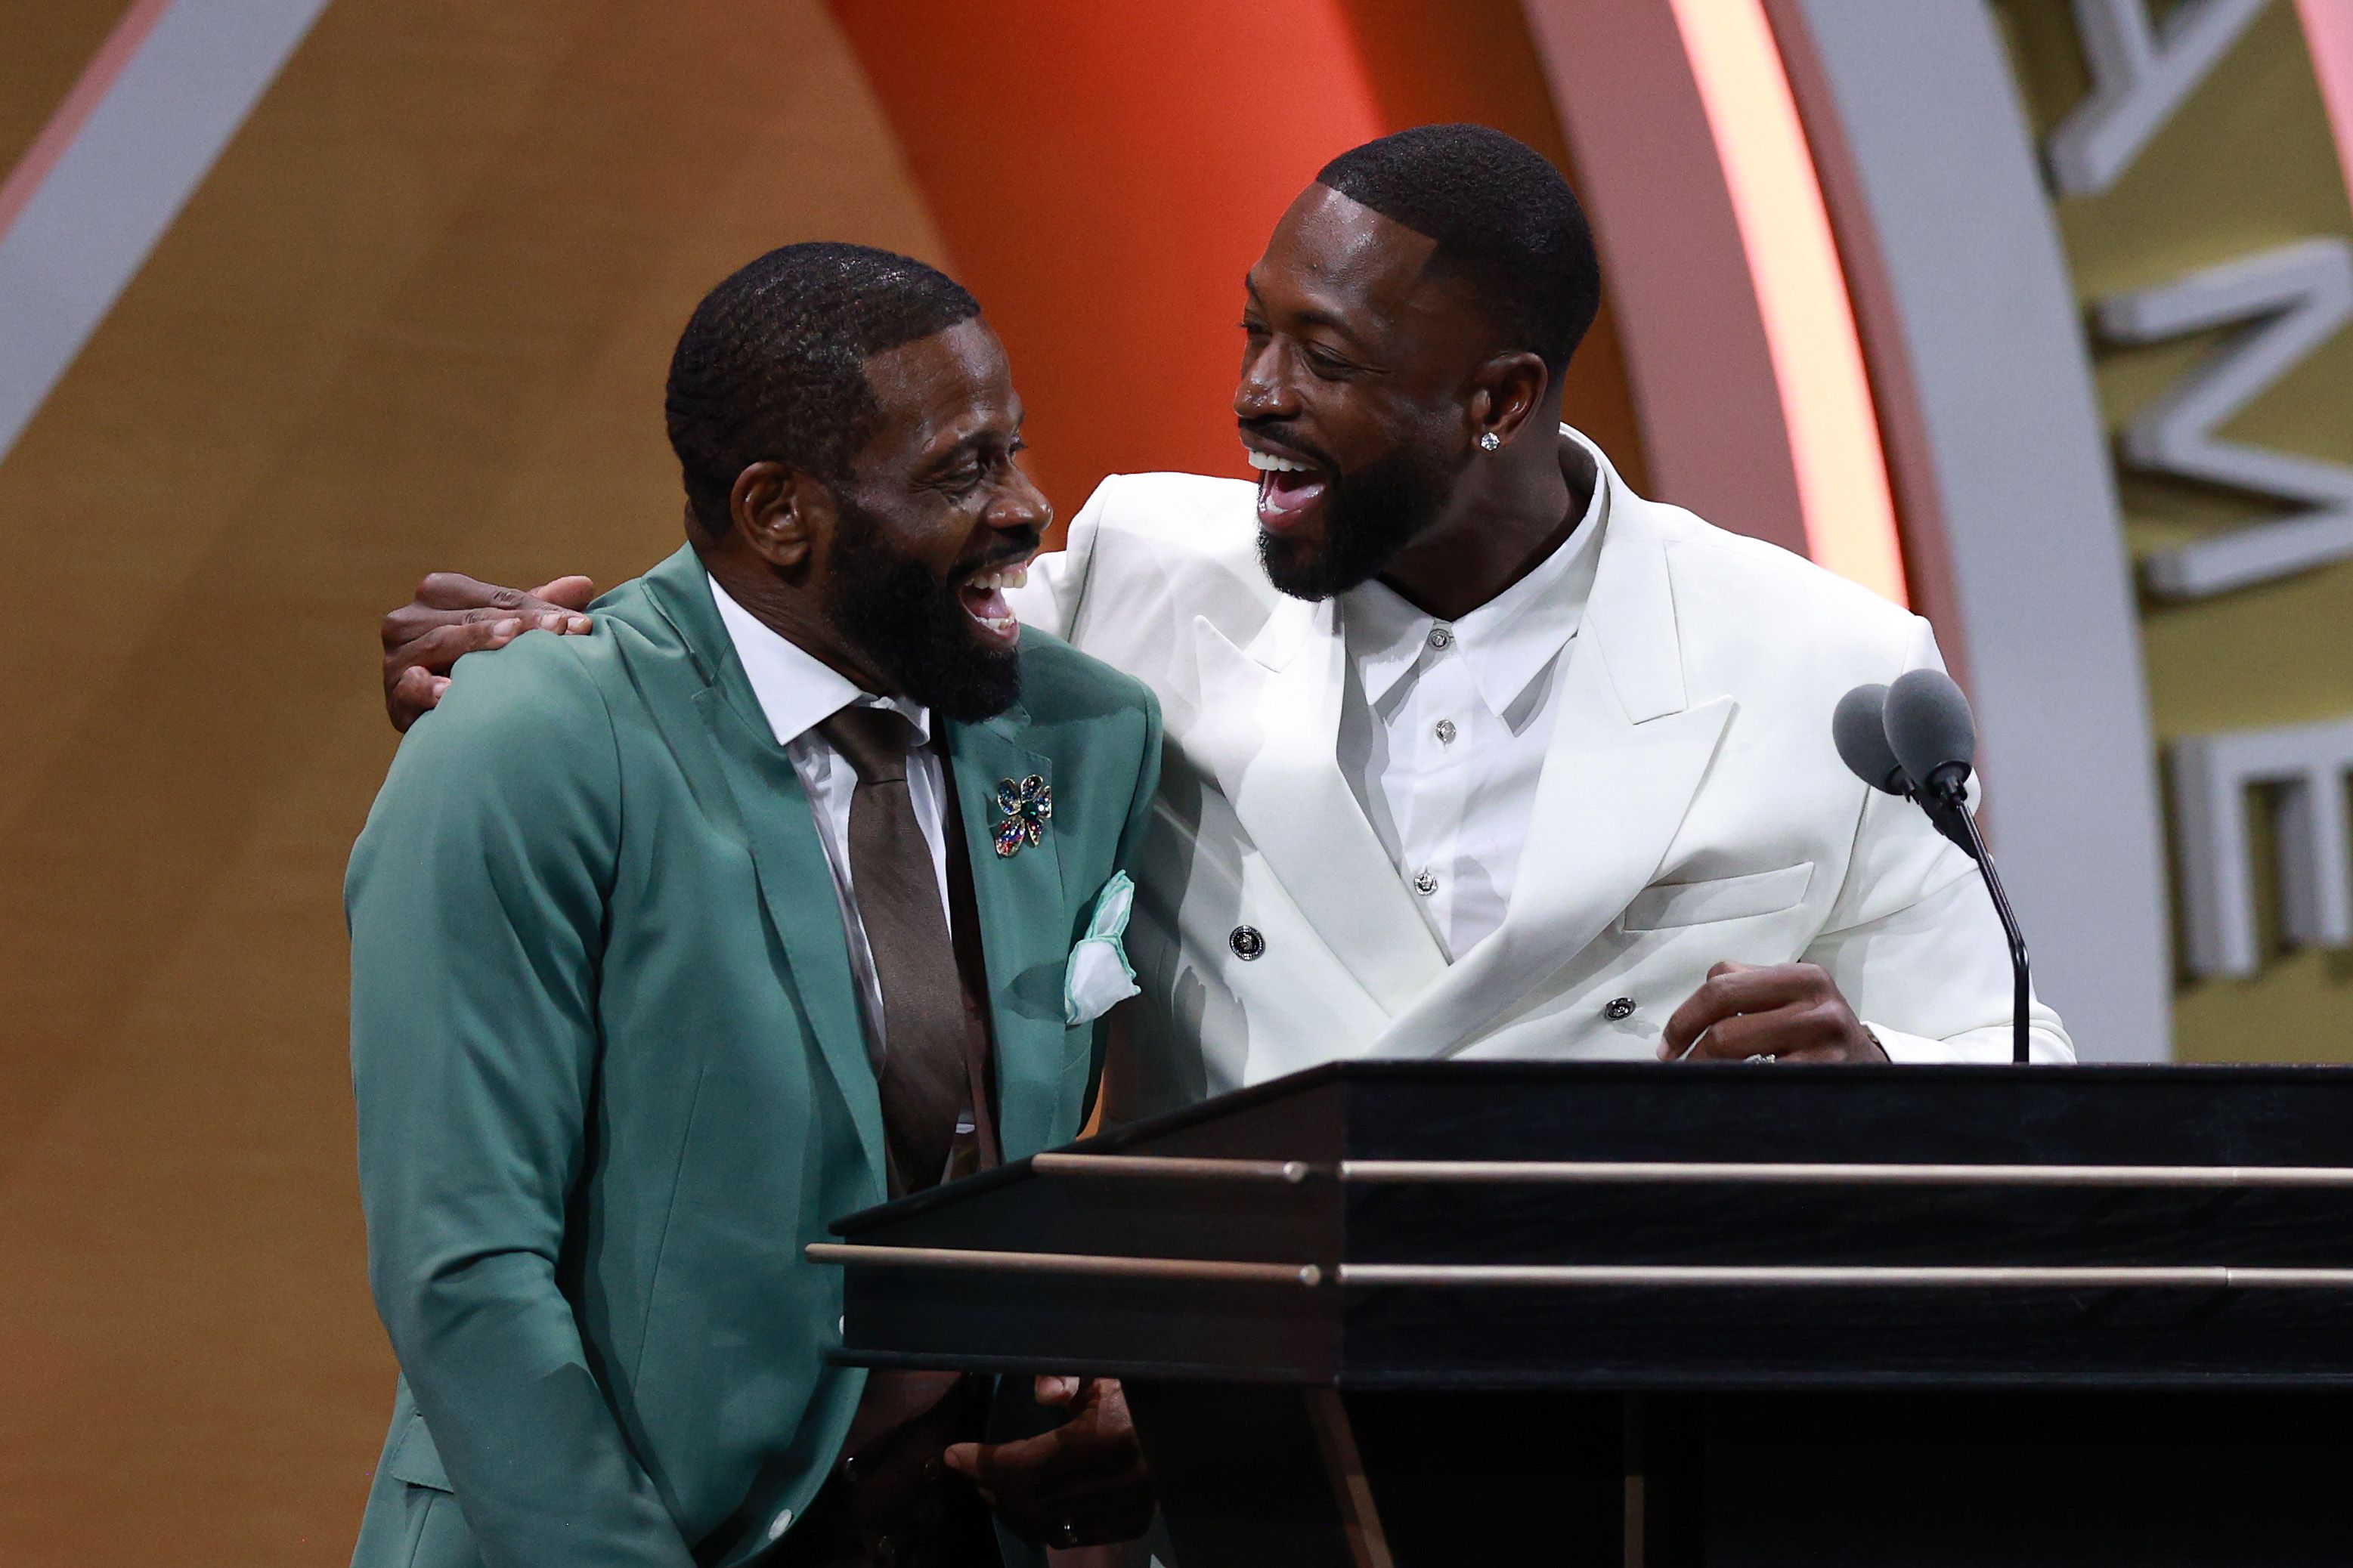 Relive moments from new Hall of Famer Dwyane Wade's time with